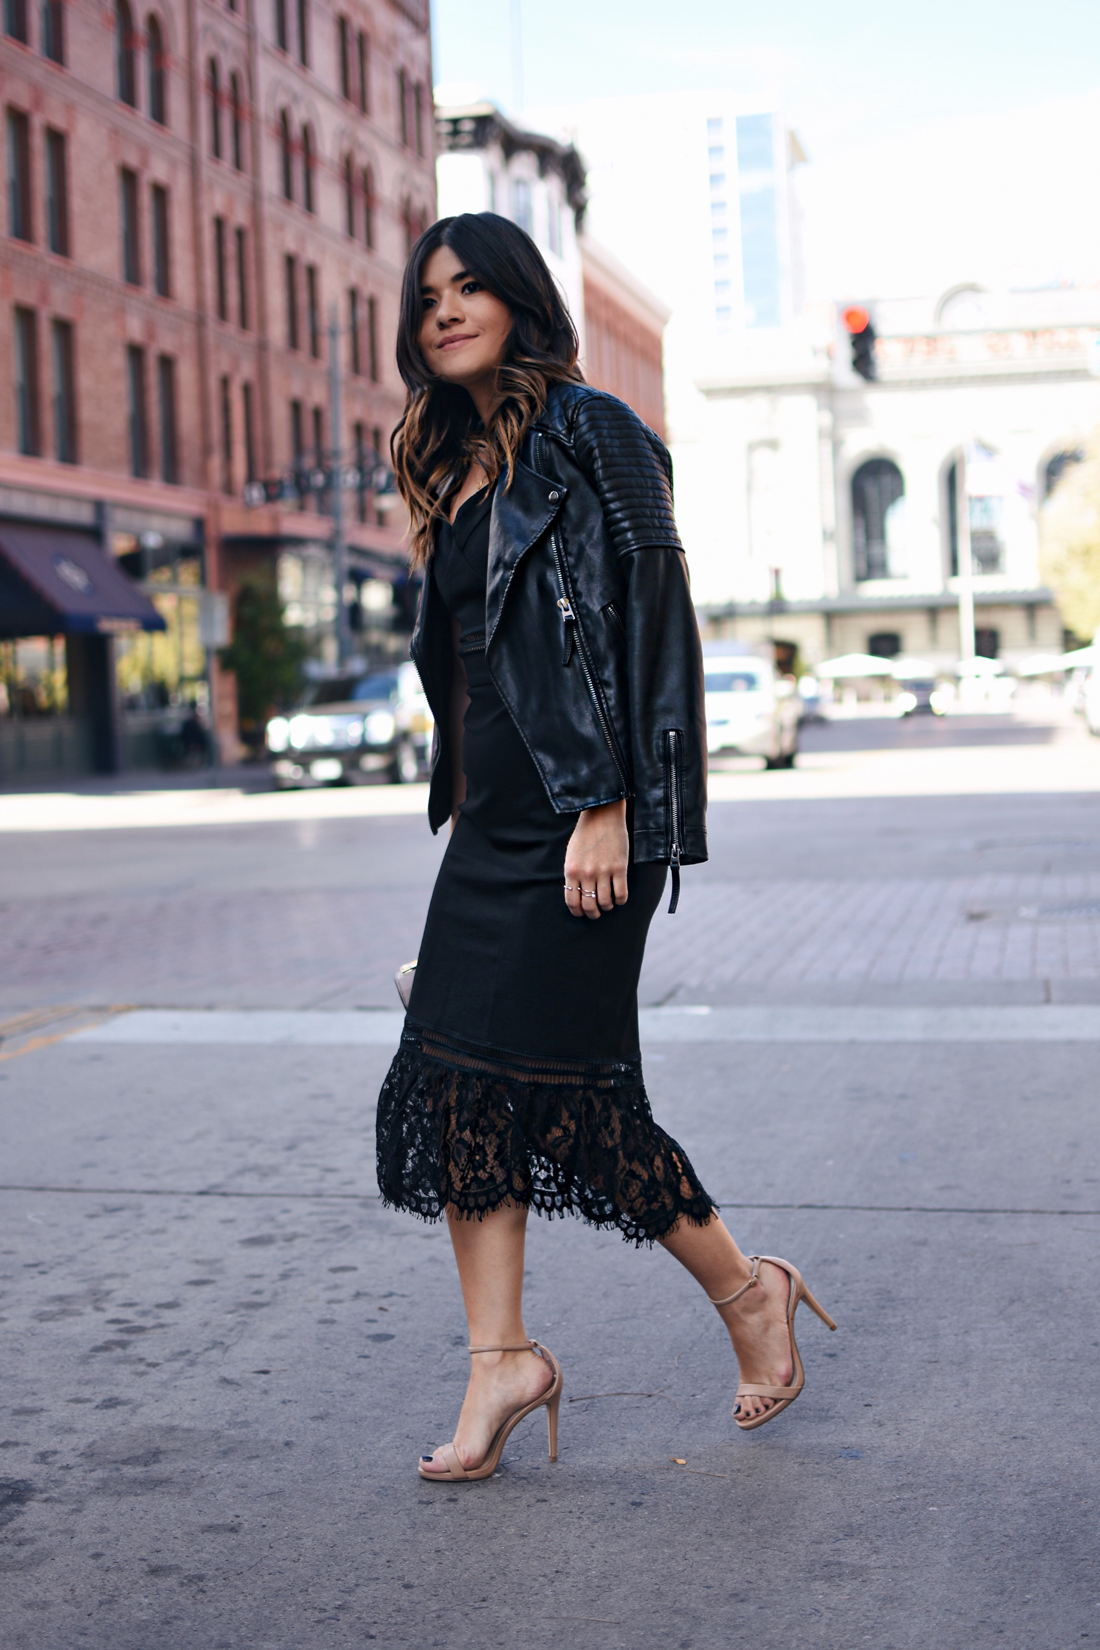 Carolina Hellal of Chic Talk wearing a total black look with a Chicwish dress and Topshop faux leather jacket